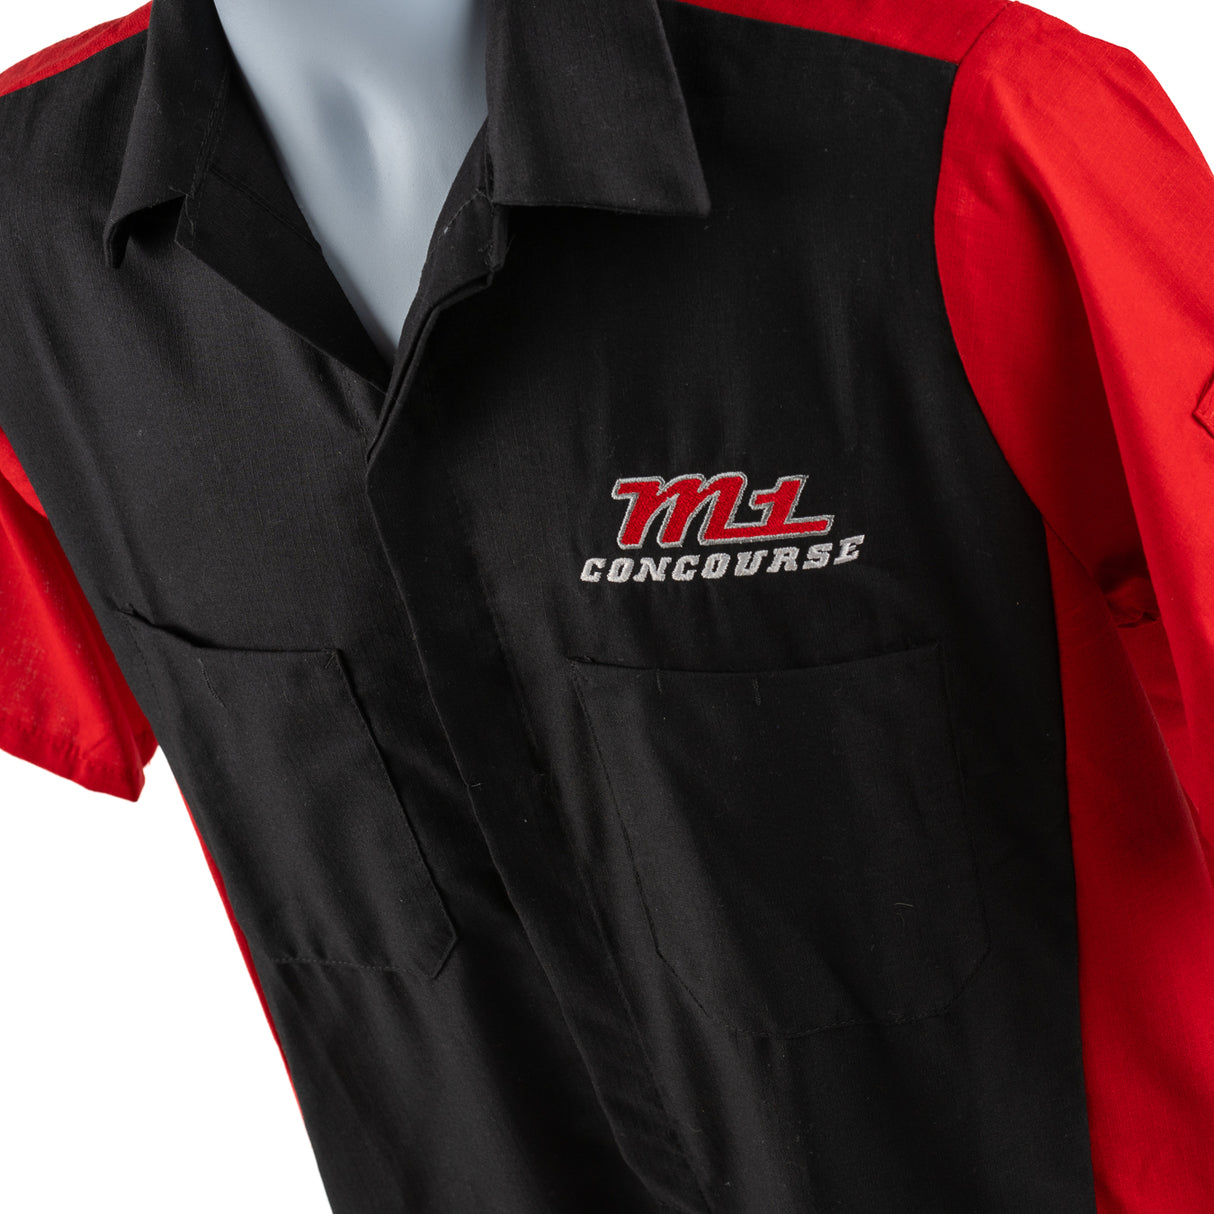 M1 Concourse Mechanic Shirt by Red Cap Brand - Black/Red